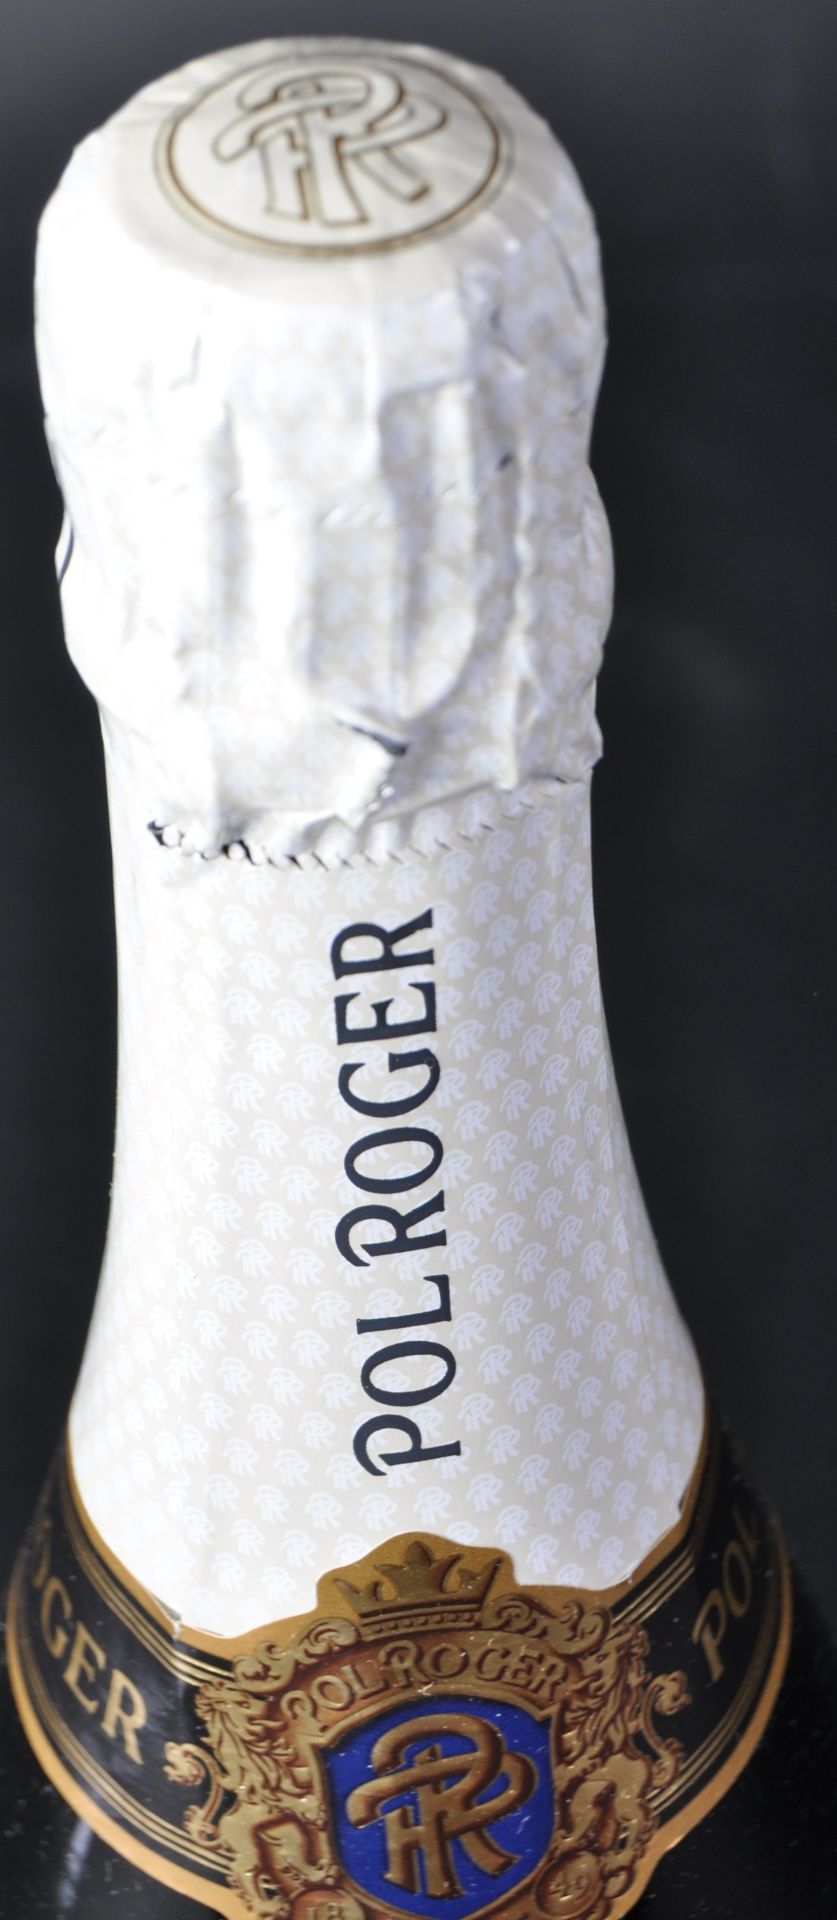 POL ROGER EXTRA CUVEE DE RESERVE CHAMPAGNE - Image 2 of 2